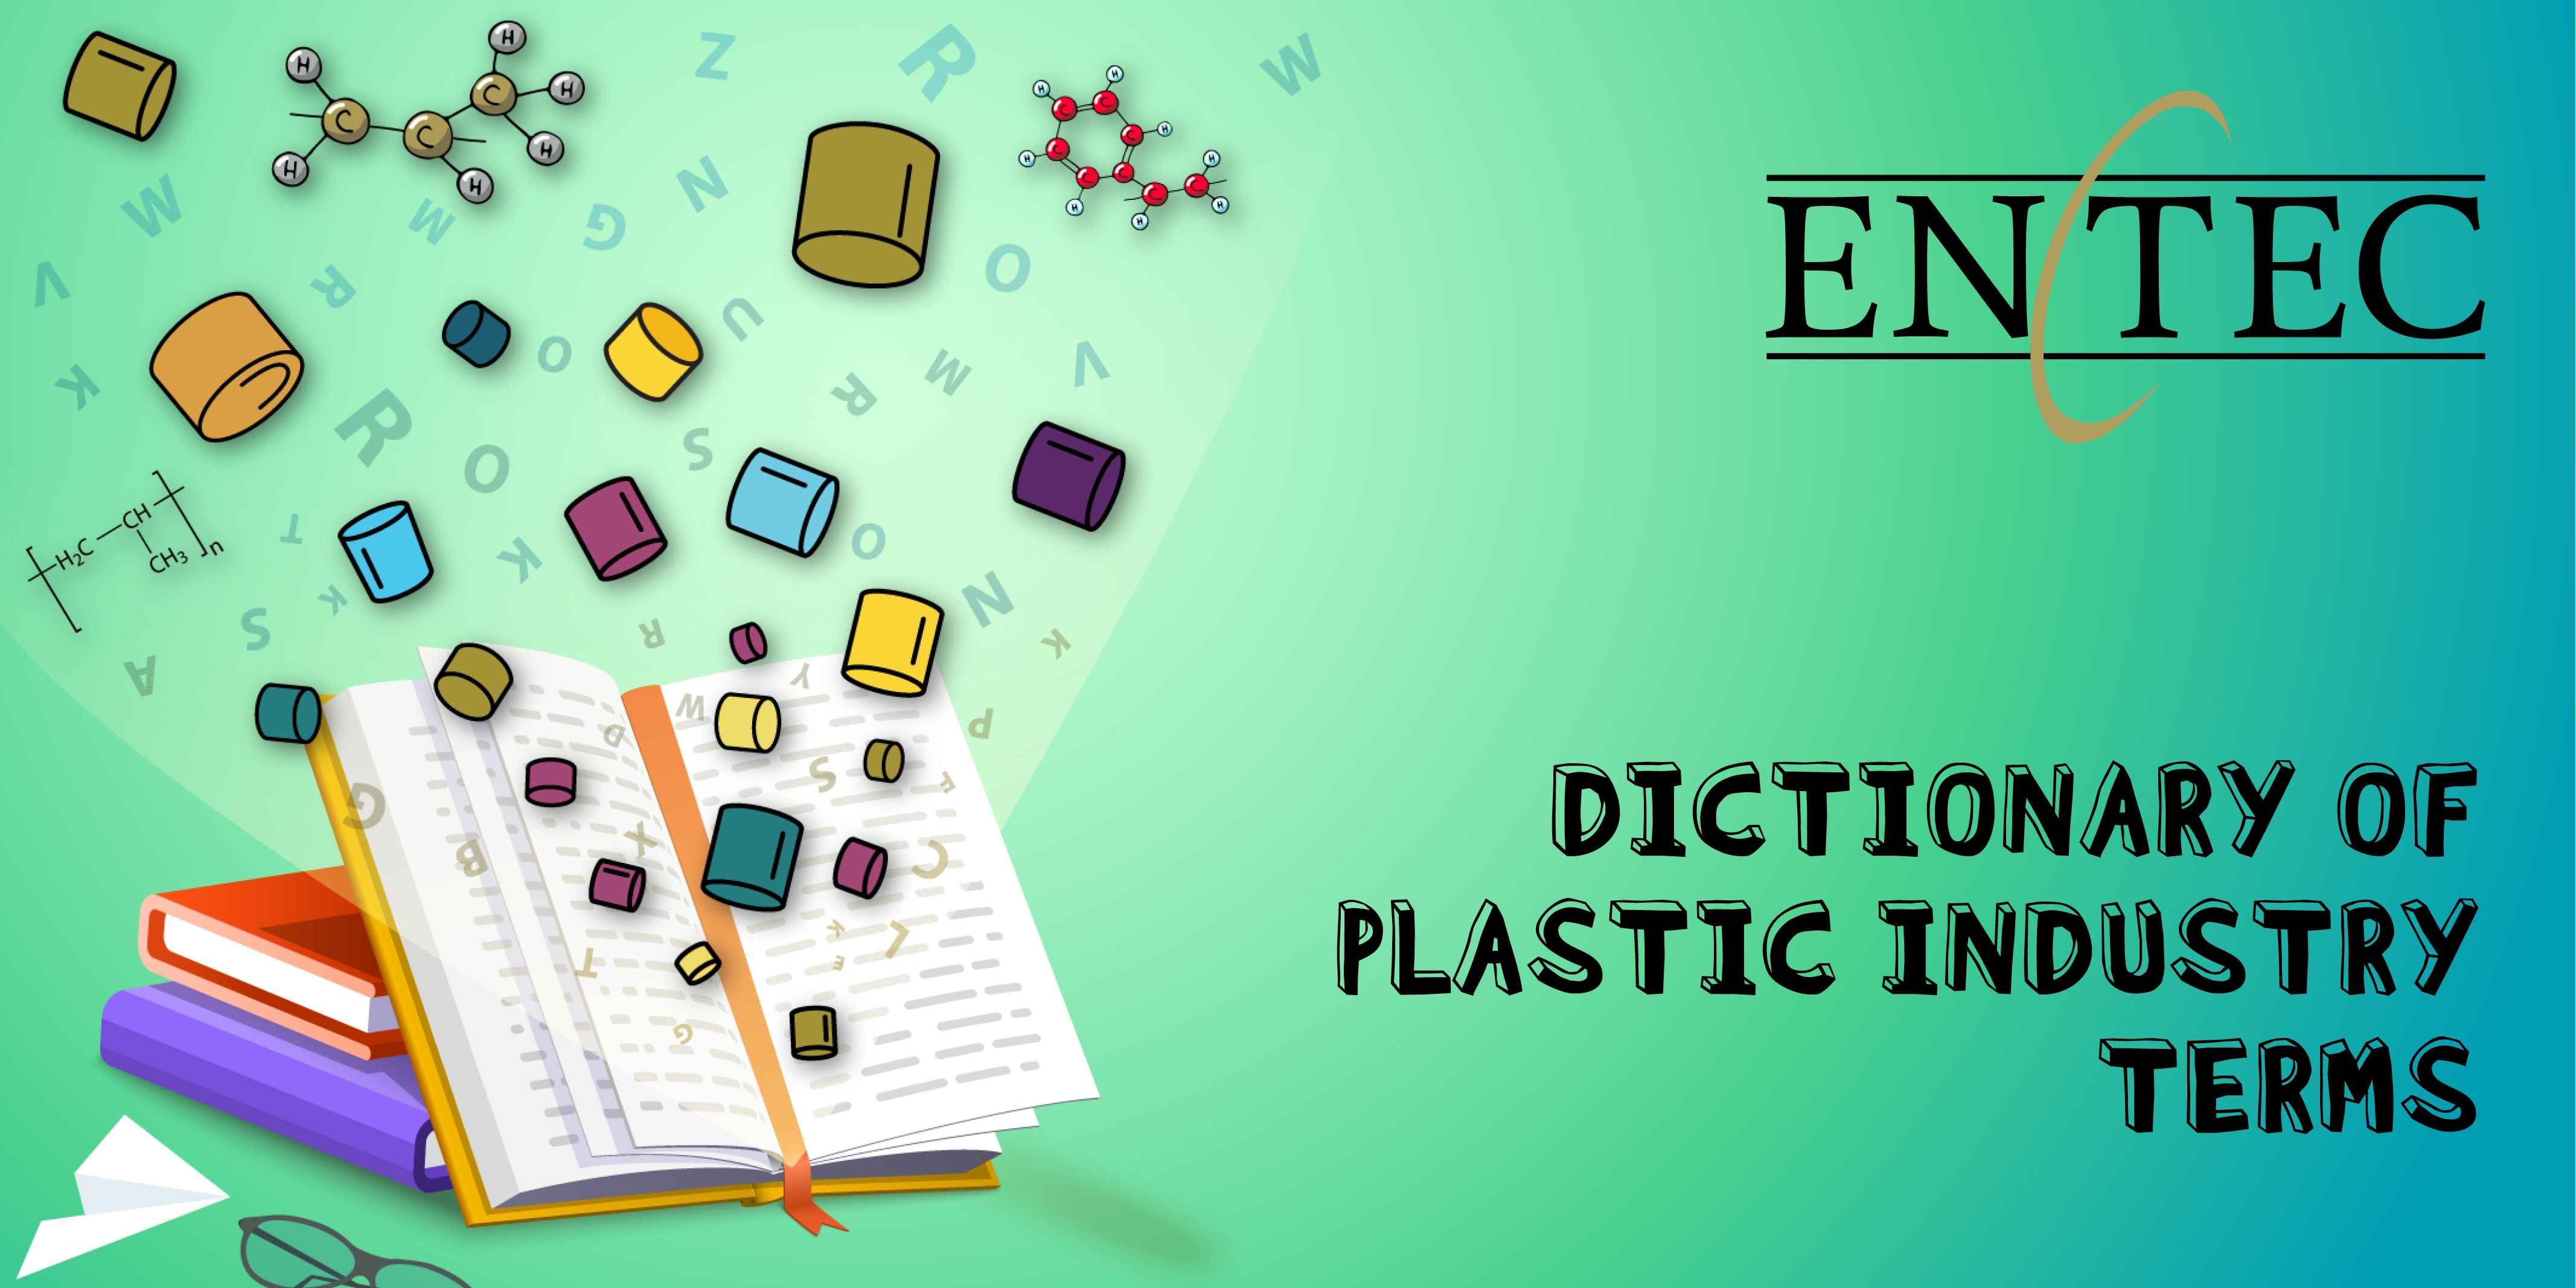 Dictionary of Plastic Industry Terms Social Media Post